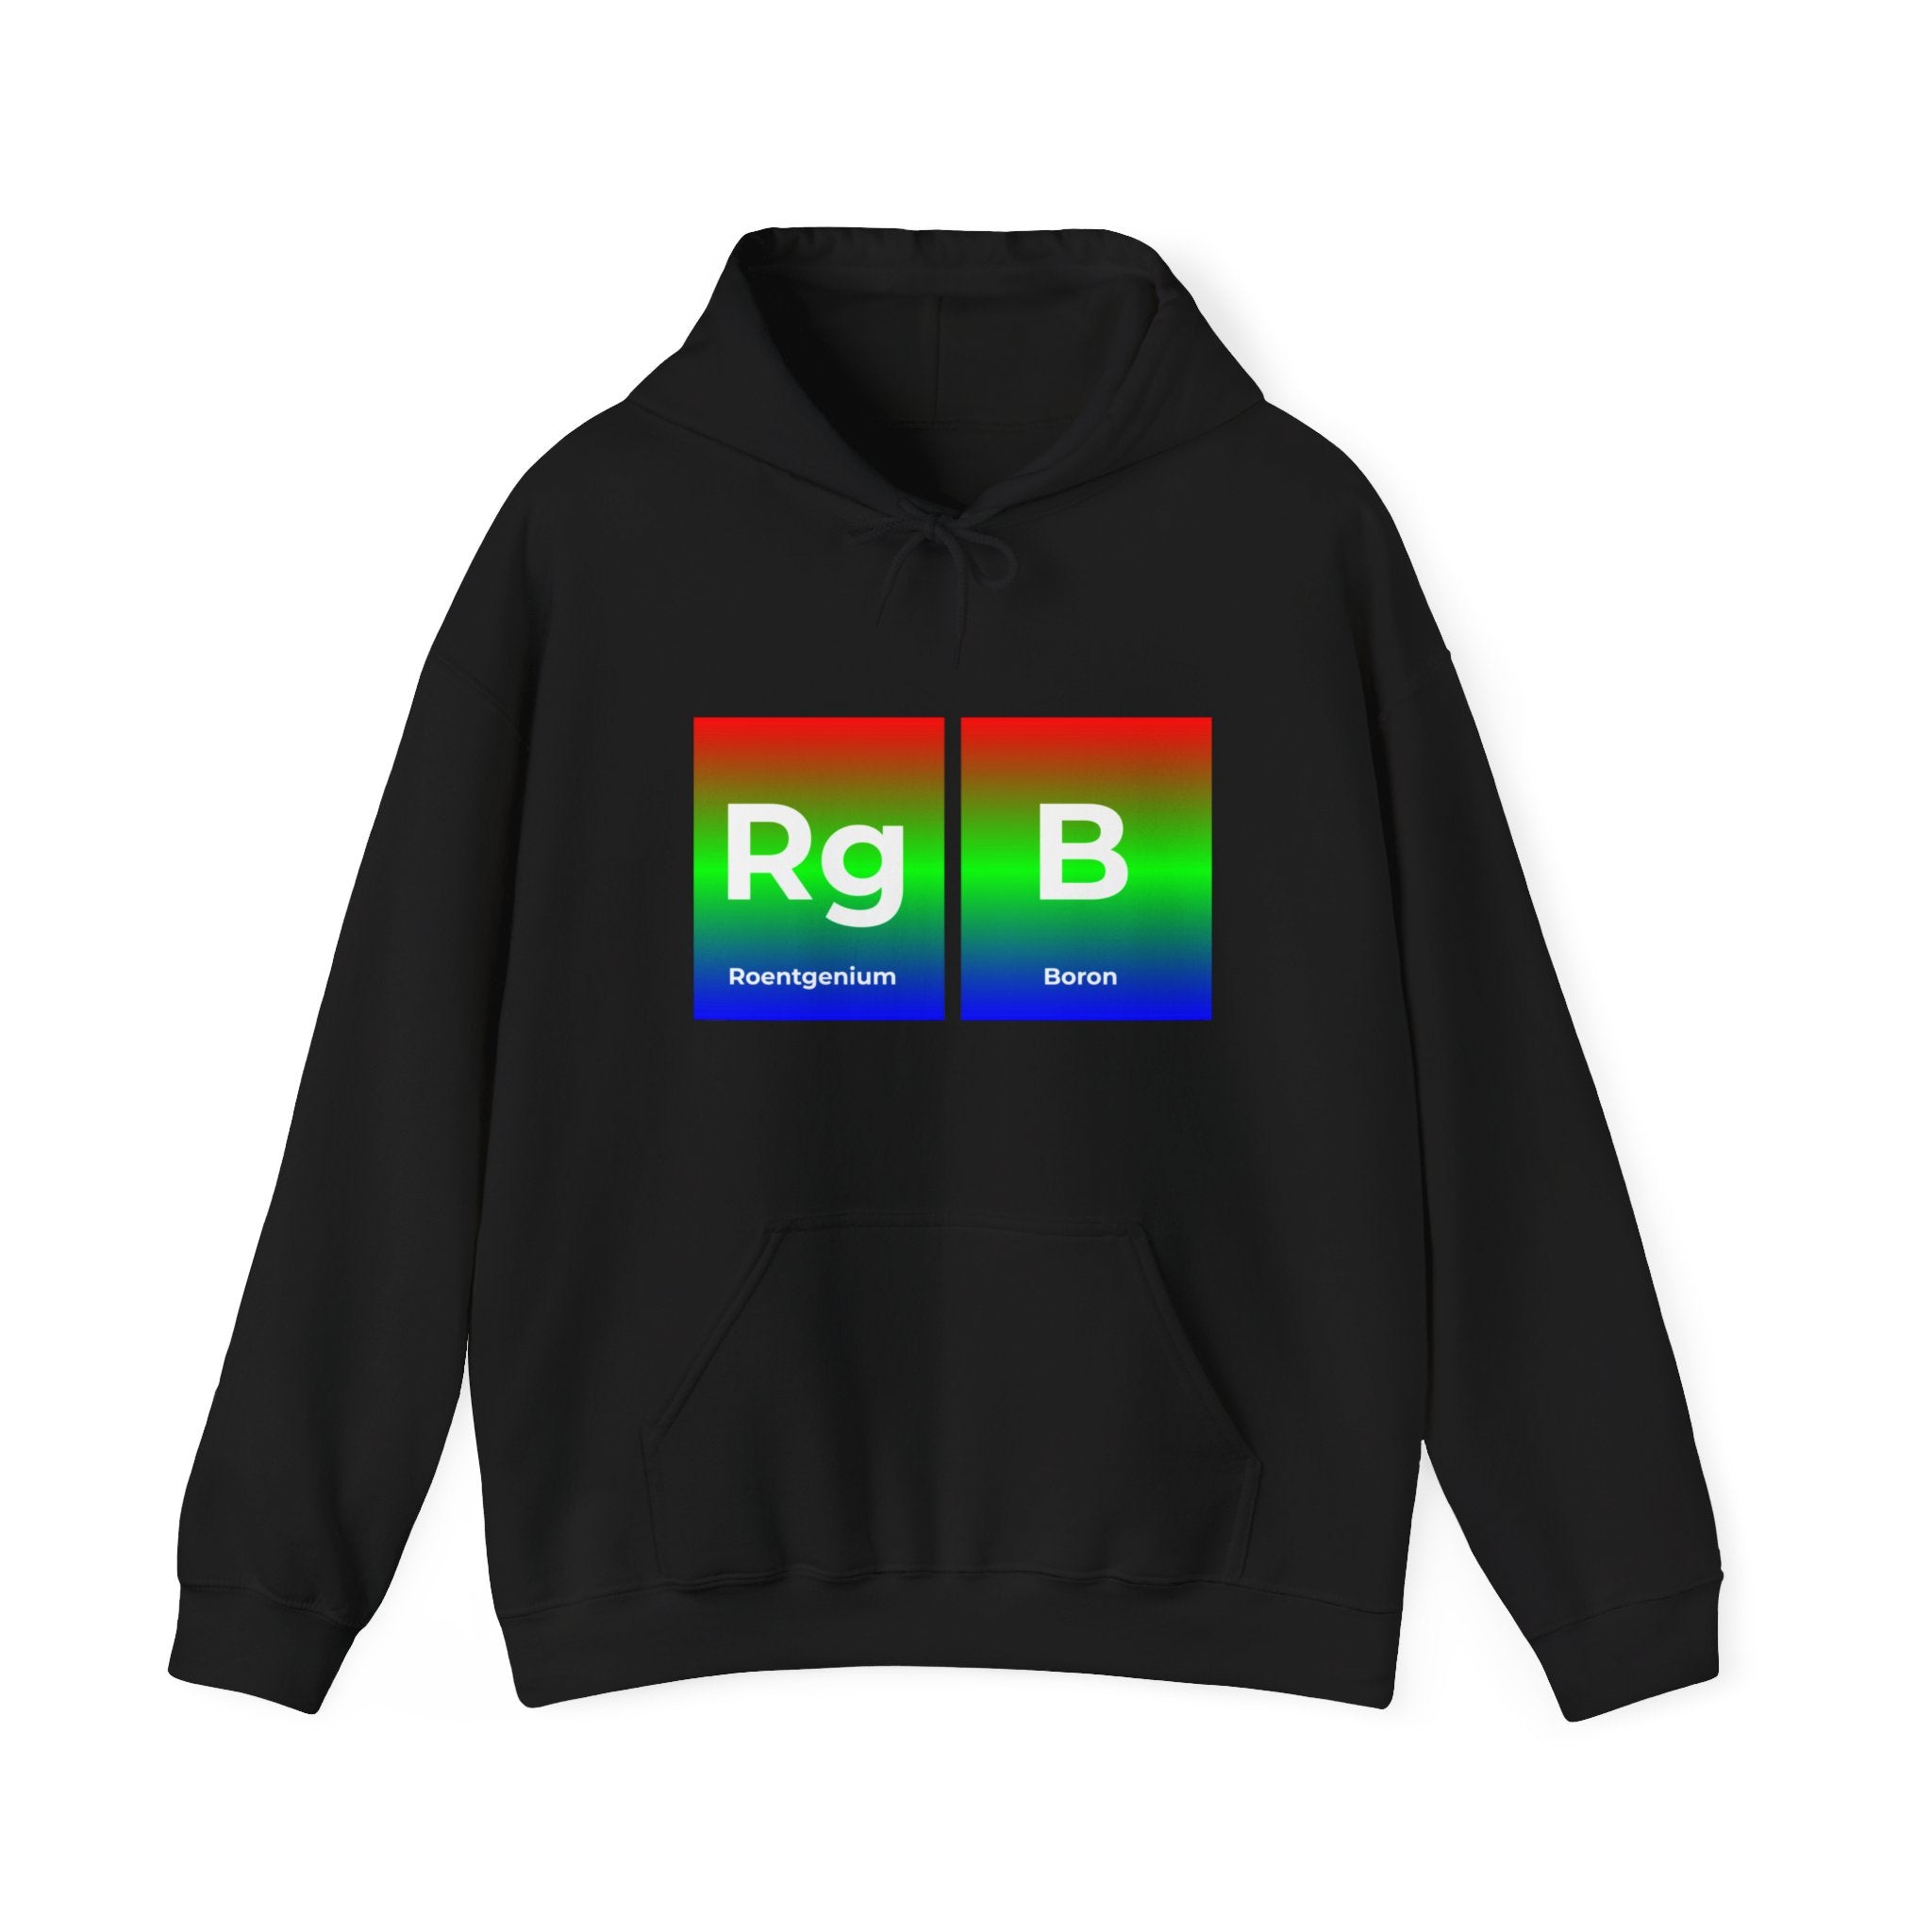 A RG-B - Hooded Sweatshirt with an RGB-themed design features the symbols "Rg" for Roentgenium and "B" for Boron, each in a gradient of red, green, and blue. Embrace fashion with this unique RG-B design.